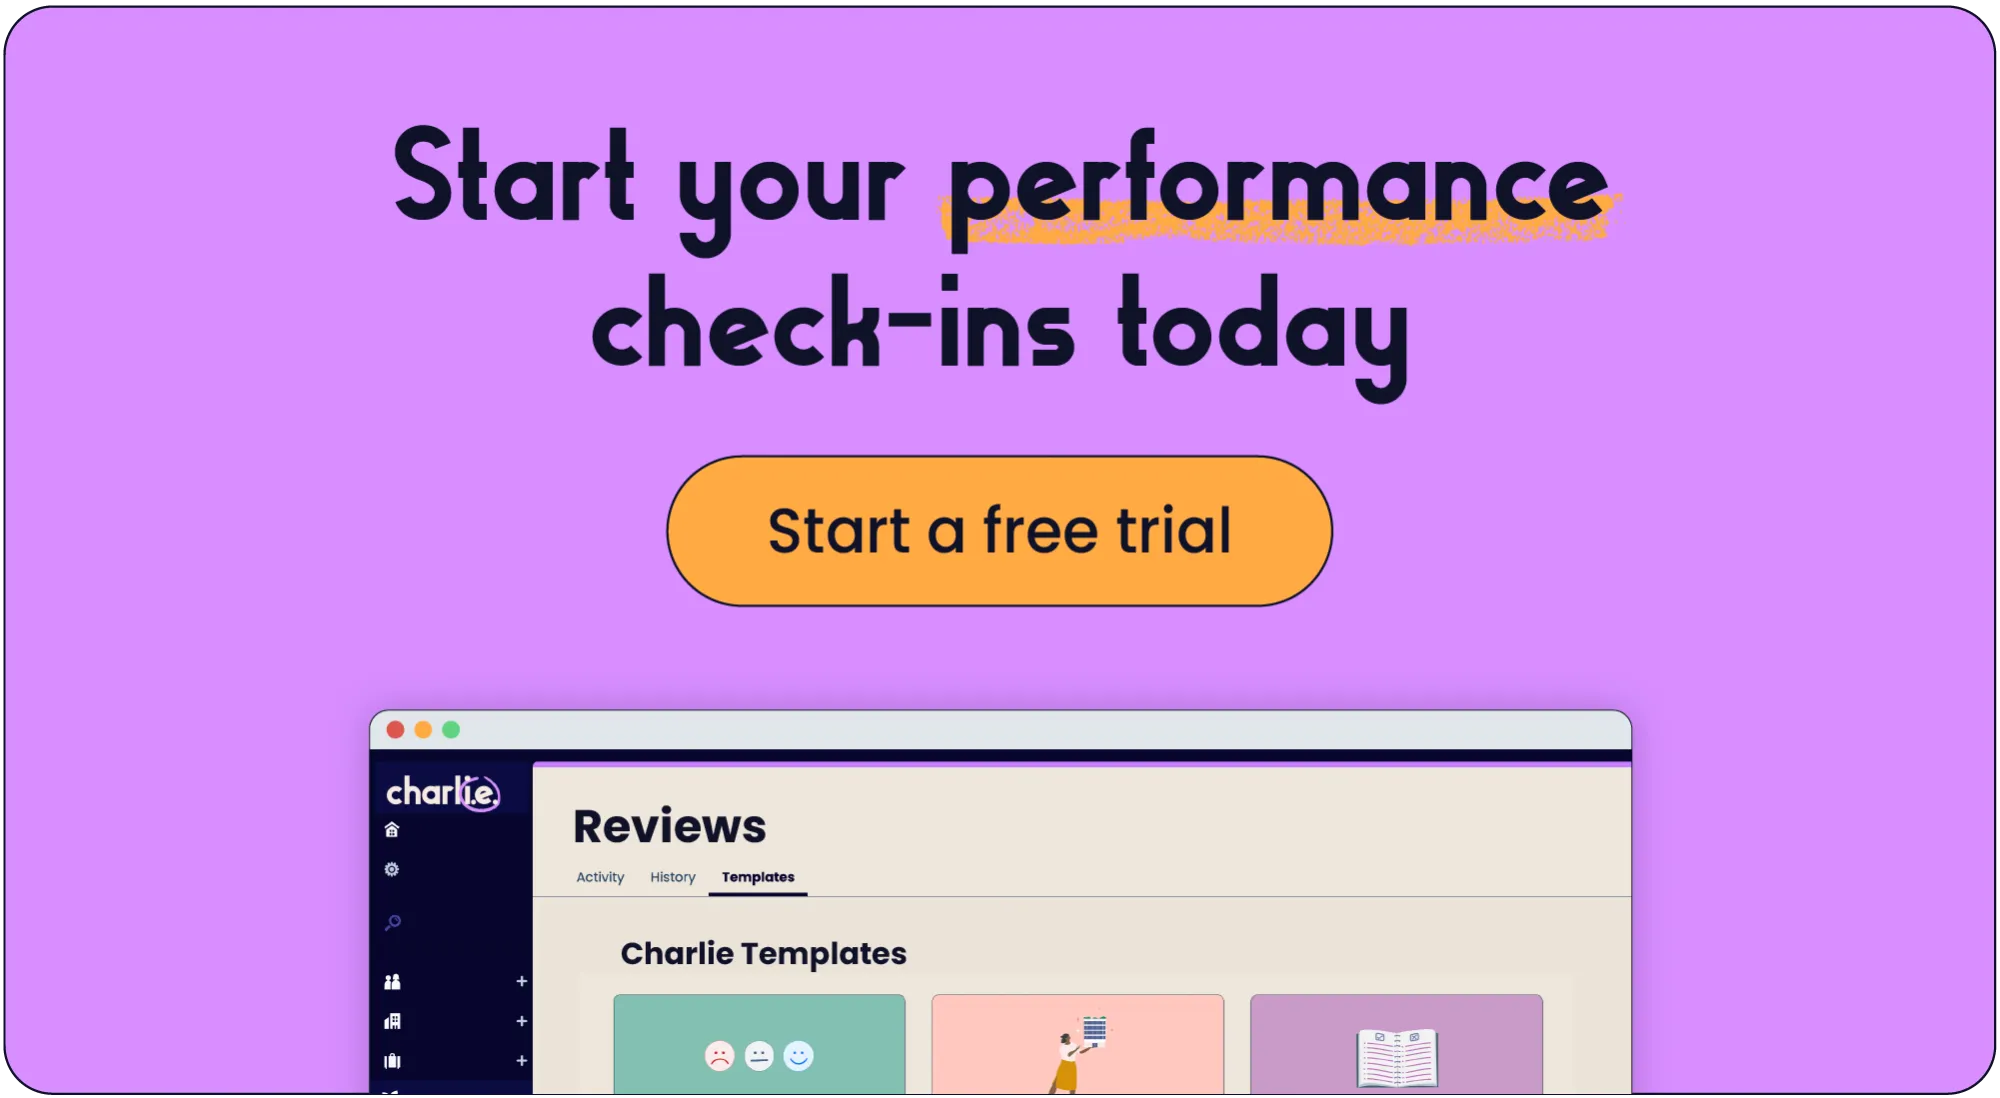 Click here to start your performance check ins